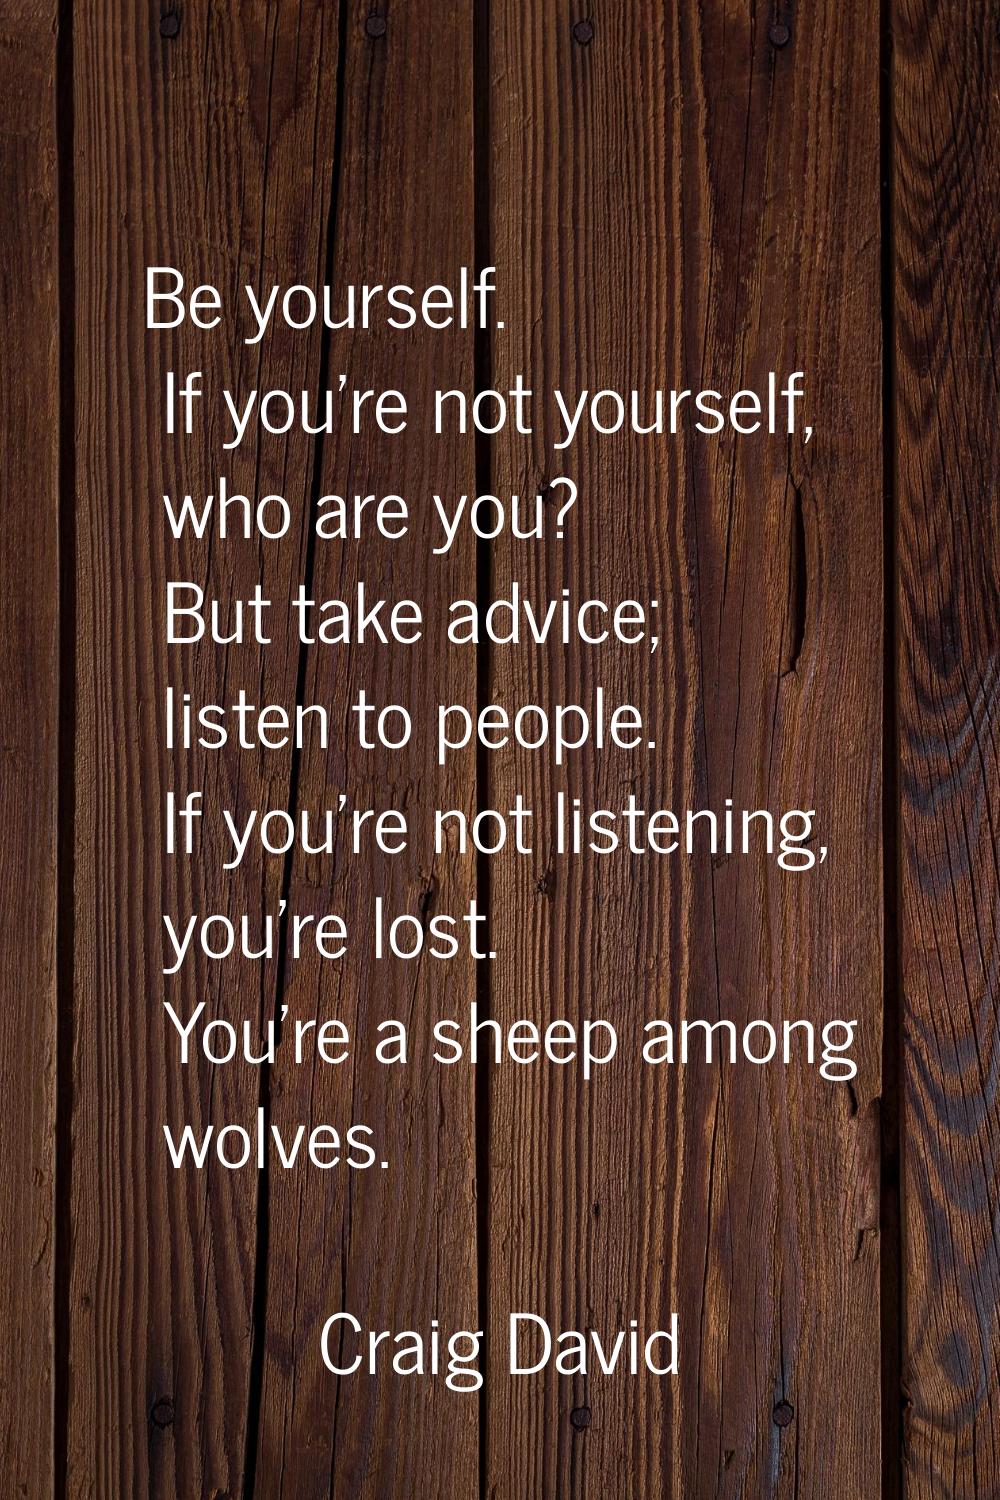 Be yourself. If you're not yourself, who are you? But take advice; listen to people. If you're not 